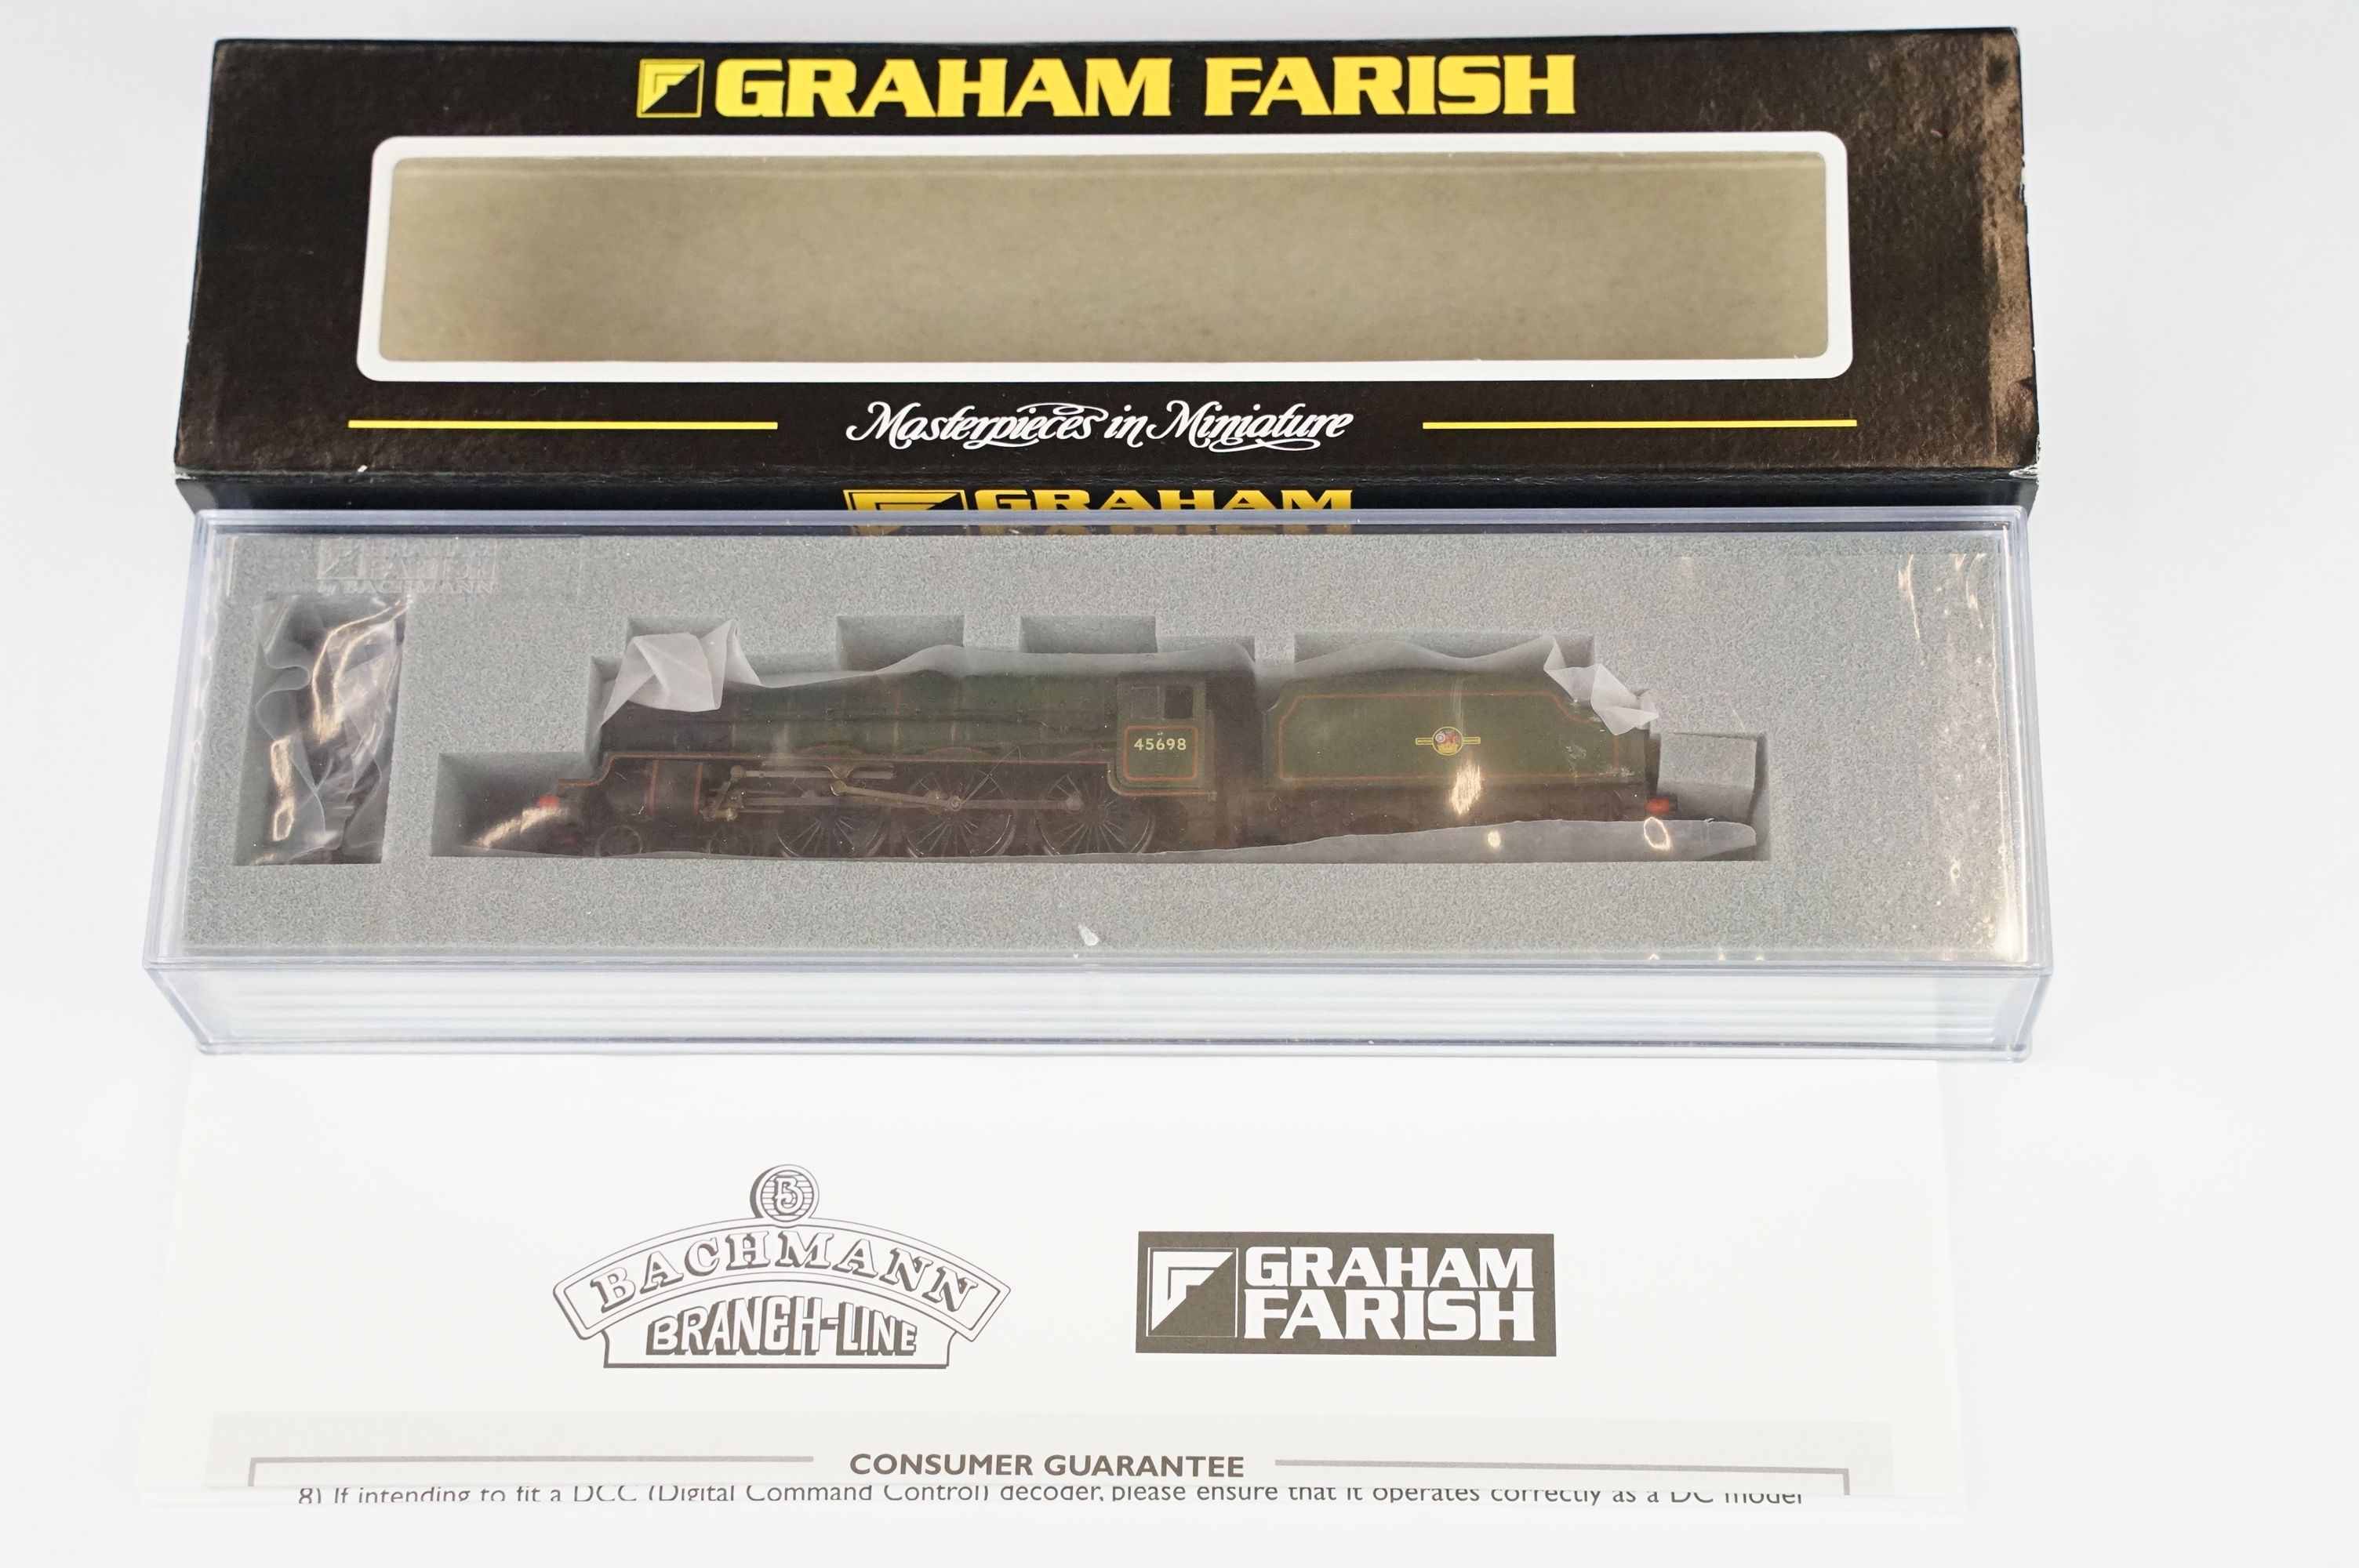 Three cased Graham Farish by Bachmann N gauge locomotives to include 372-478 Jubilee Class 45698 - Image 4 of 8